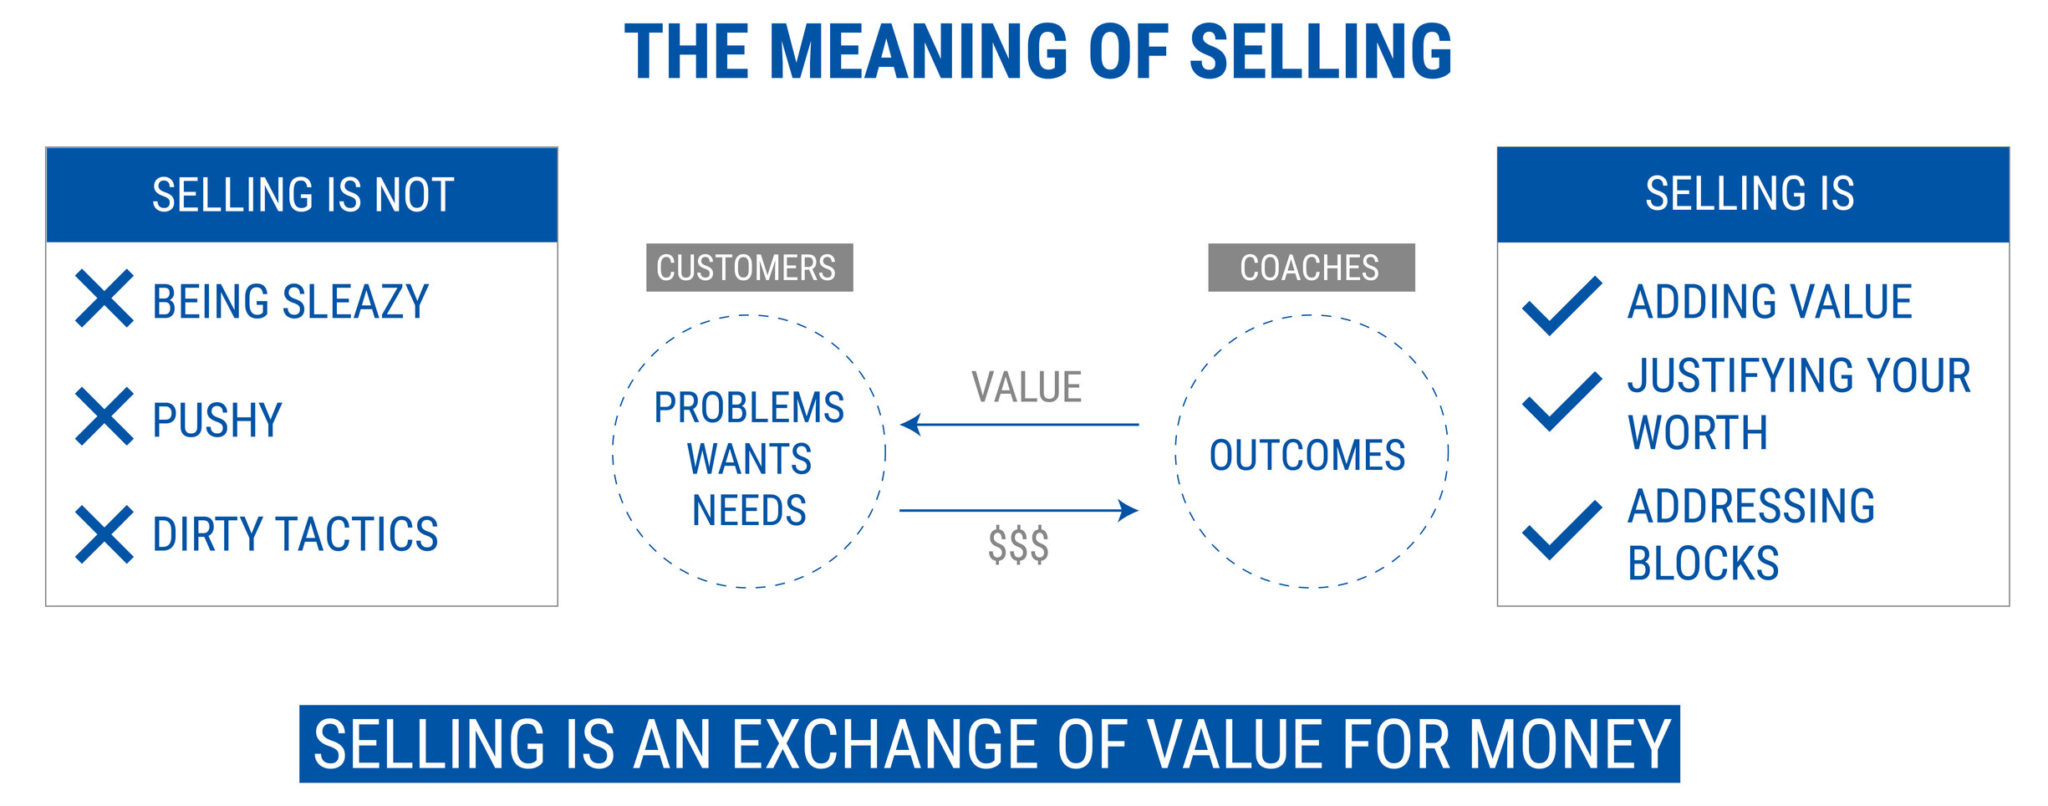 the meaning of selling - starting a coaching business while working full-time